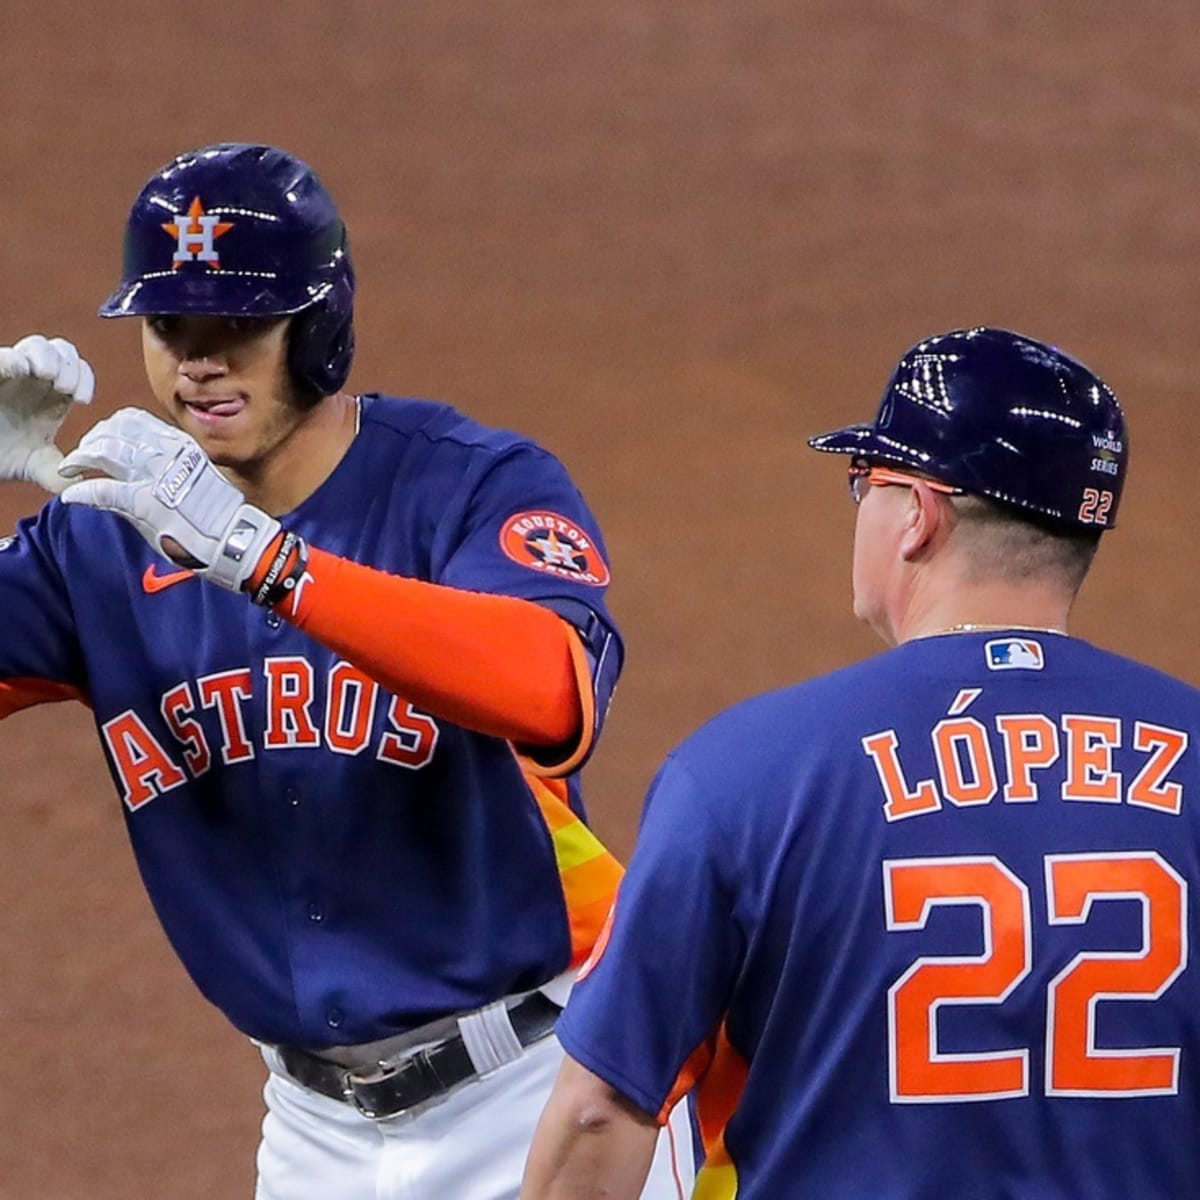 Jeremy Pena makes Astros history by winning Gold Glove as a rookie